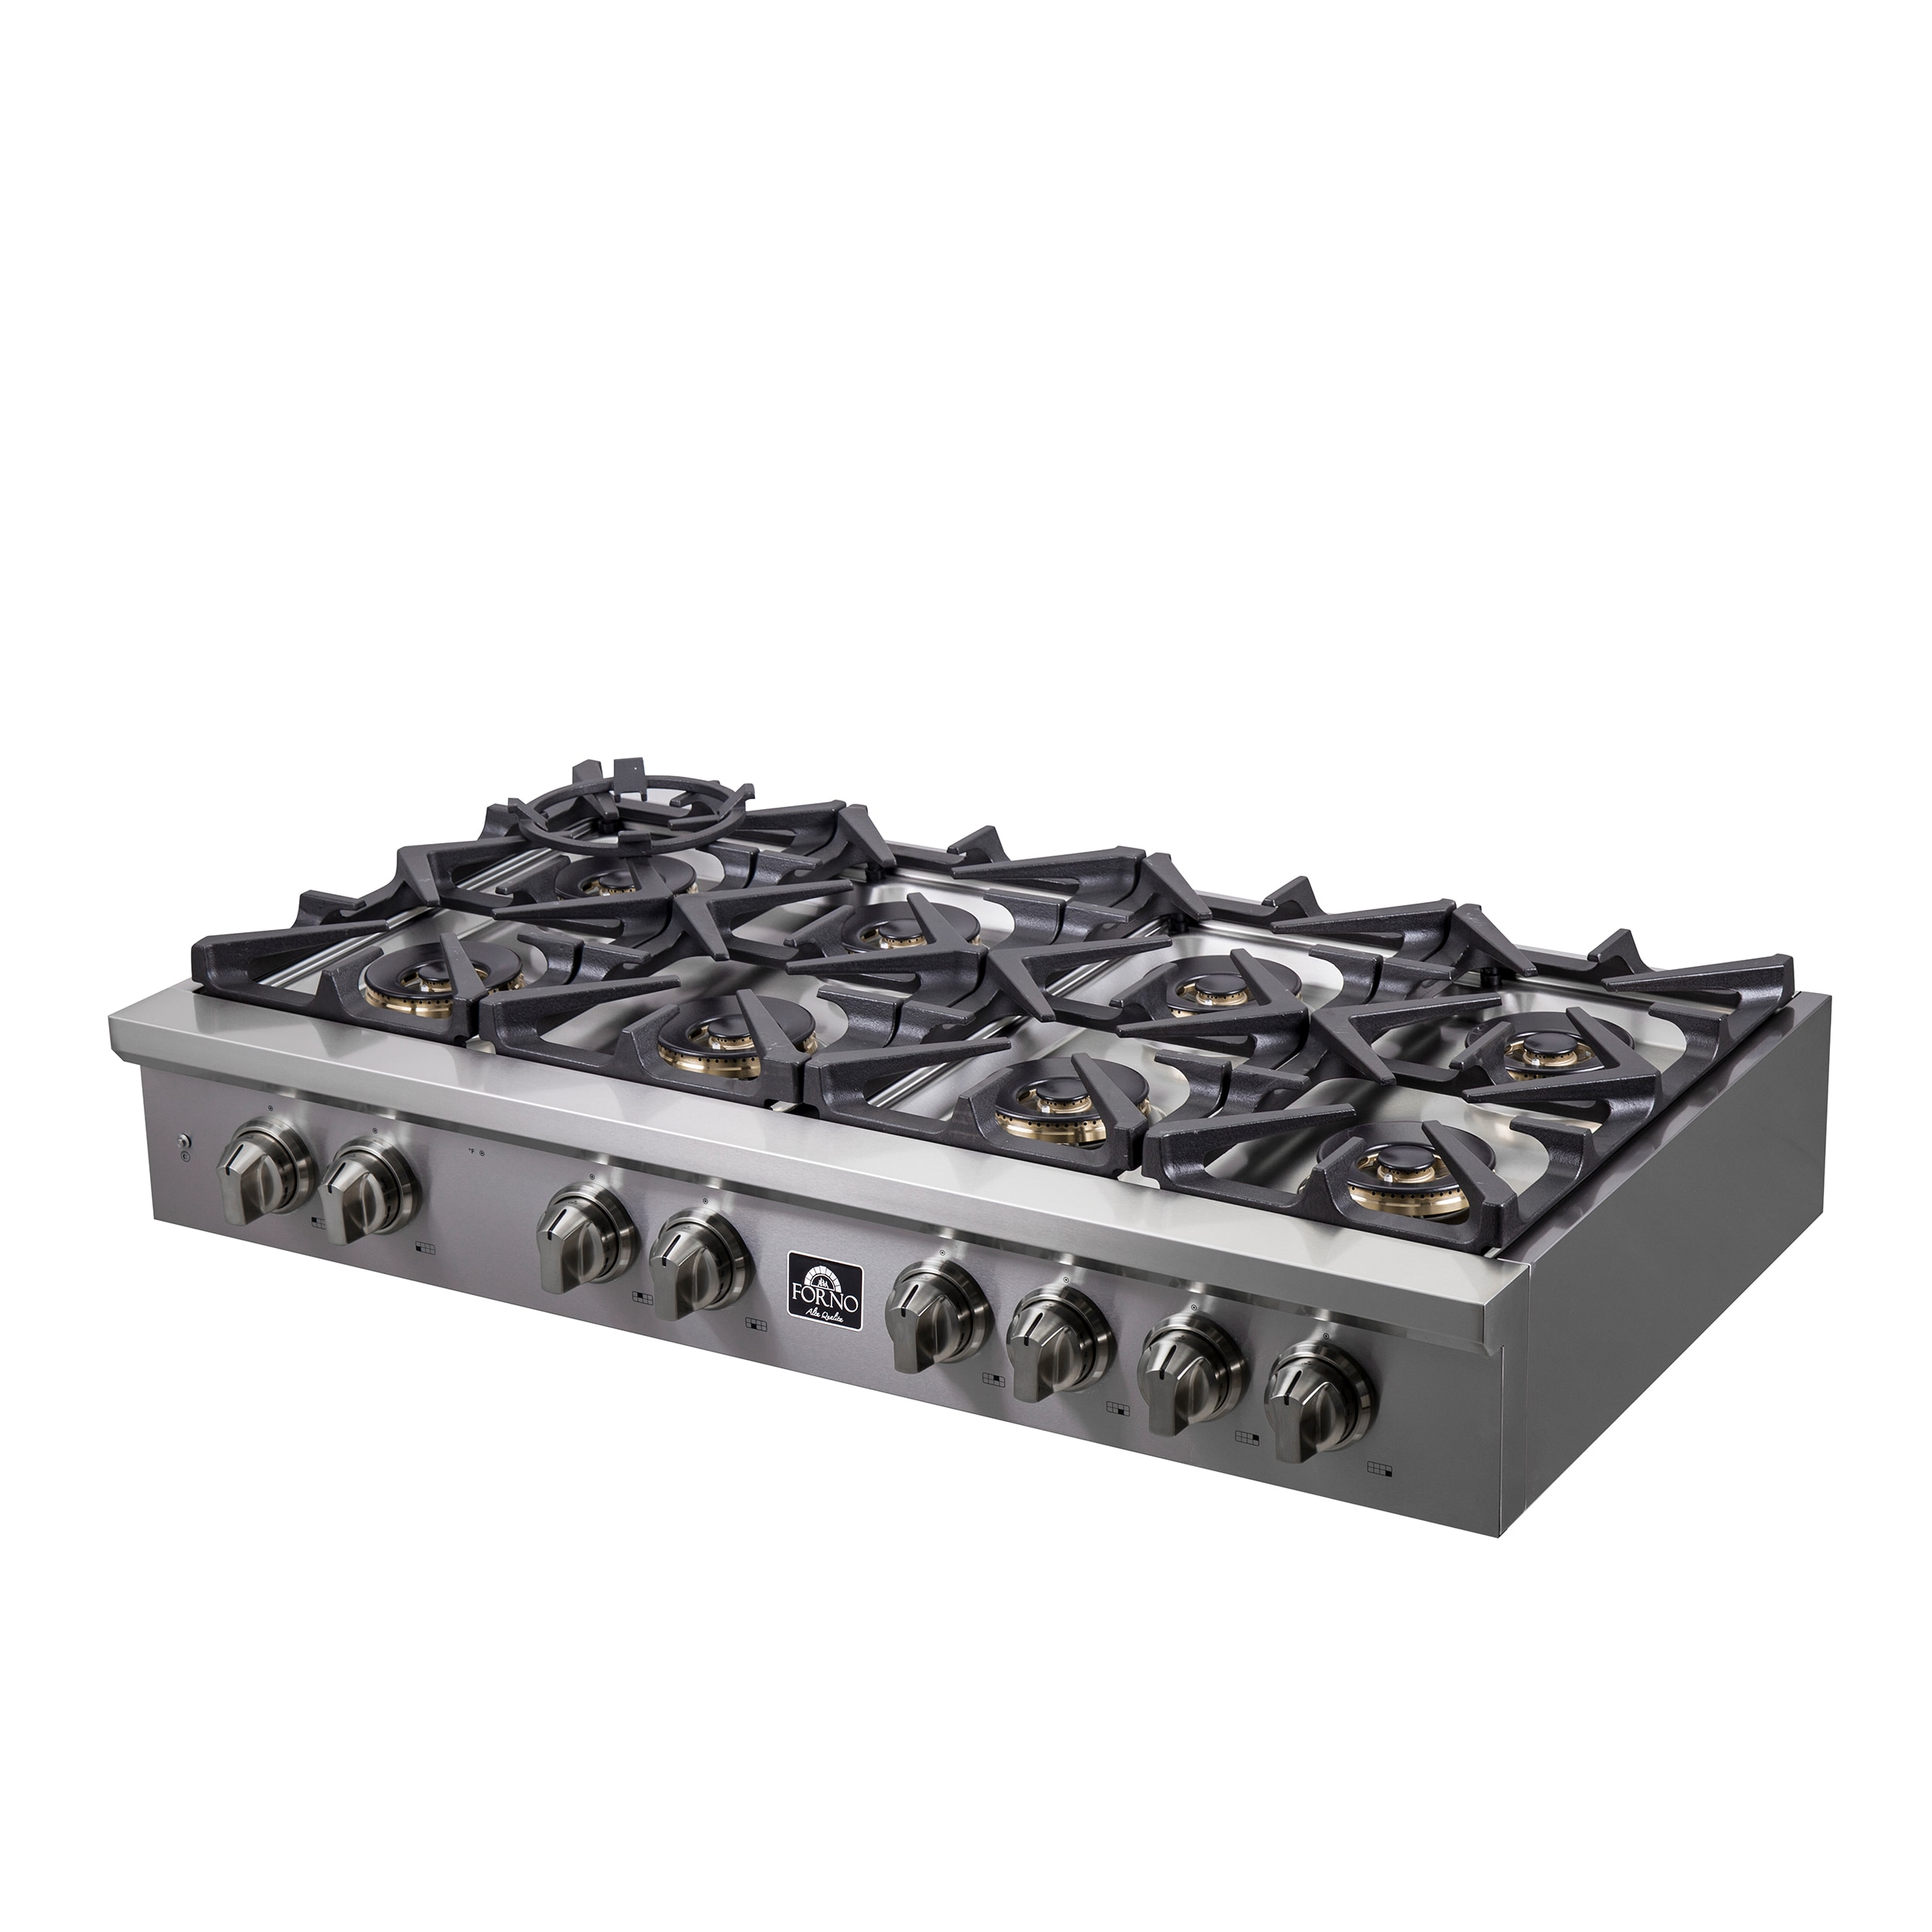 Forno Spezia 48-in 8 Burners Stainless Steel GAS Cooktop | FCTGS5751-48